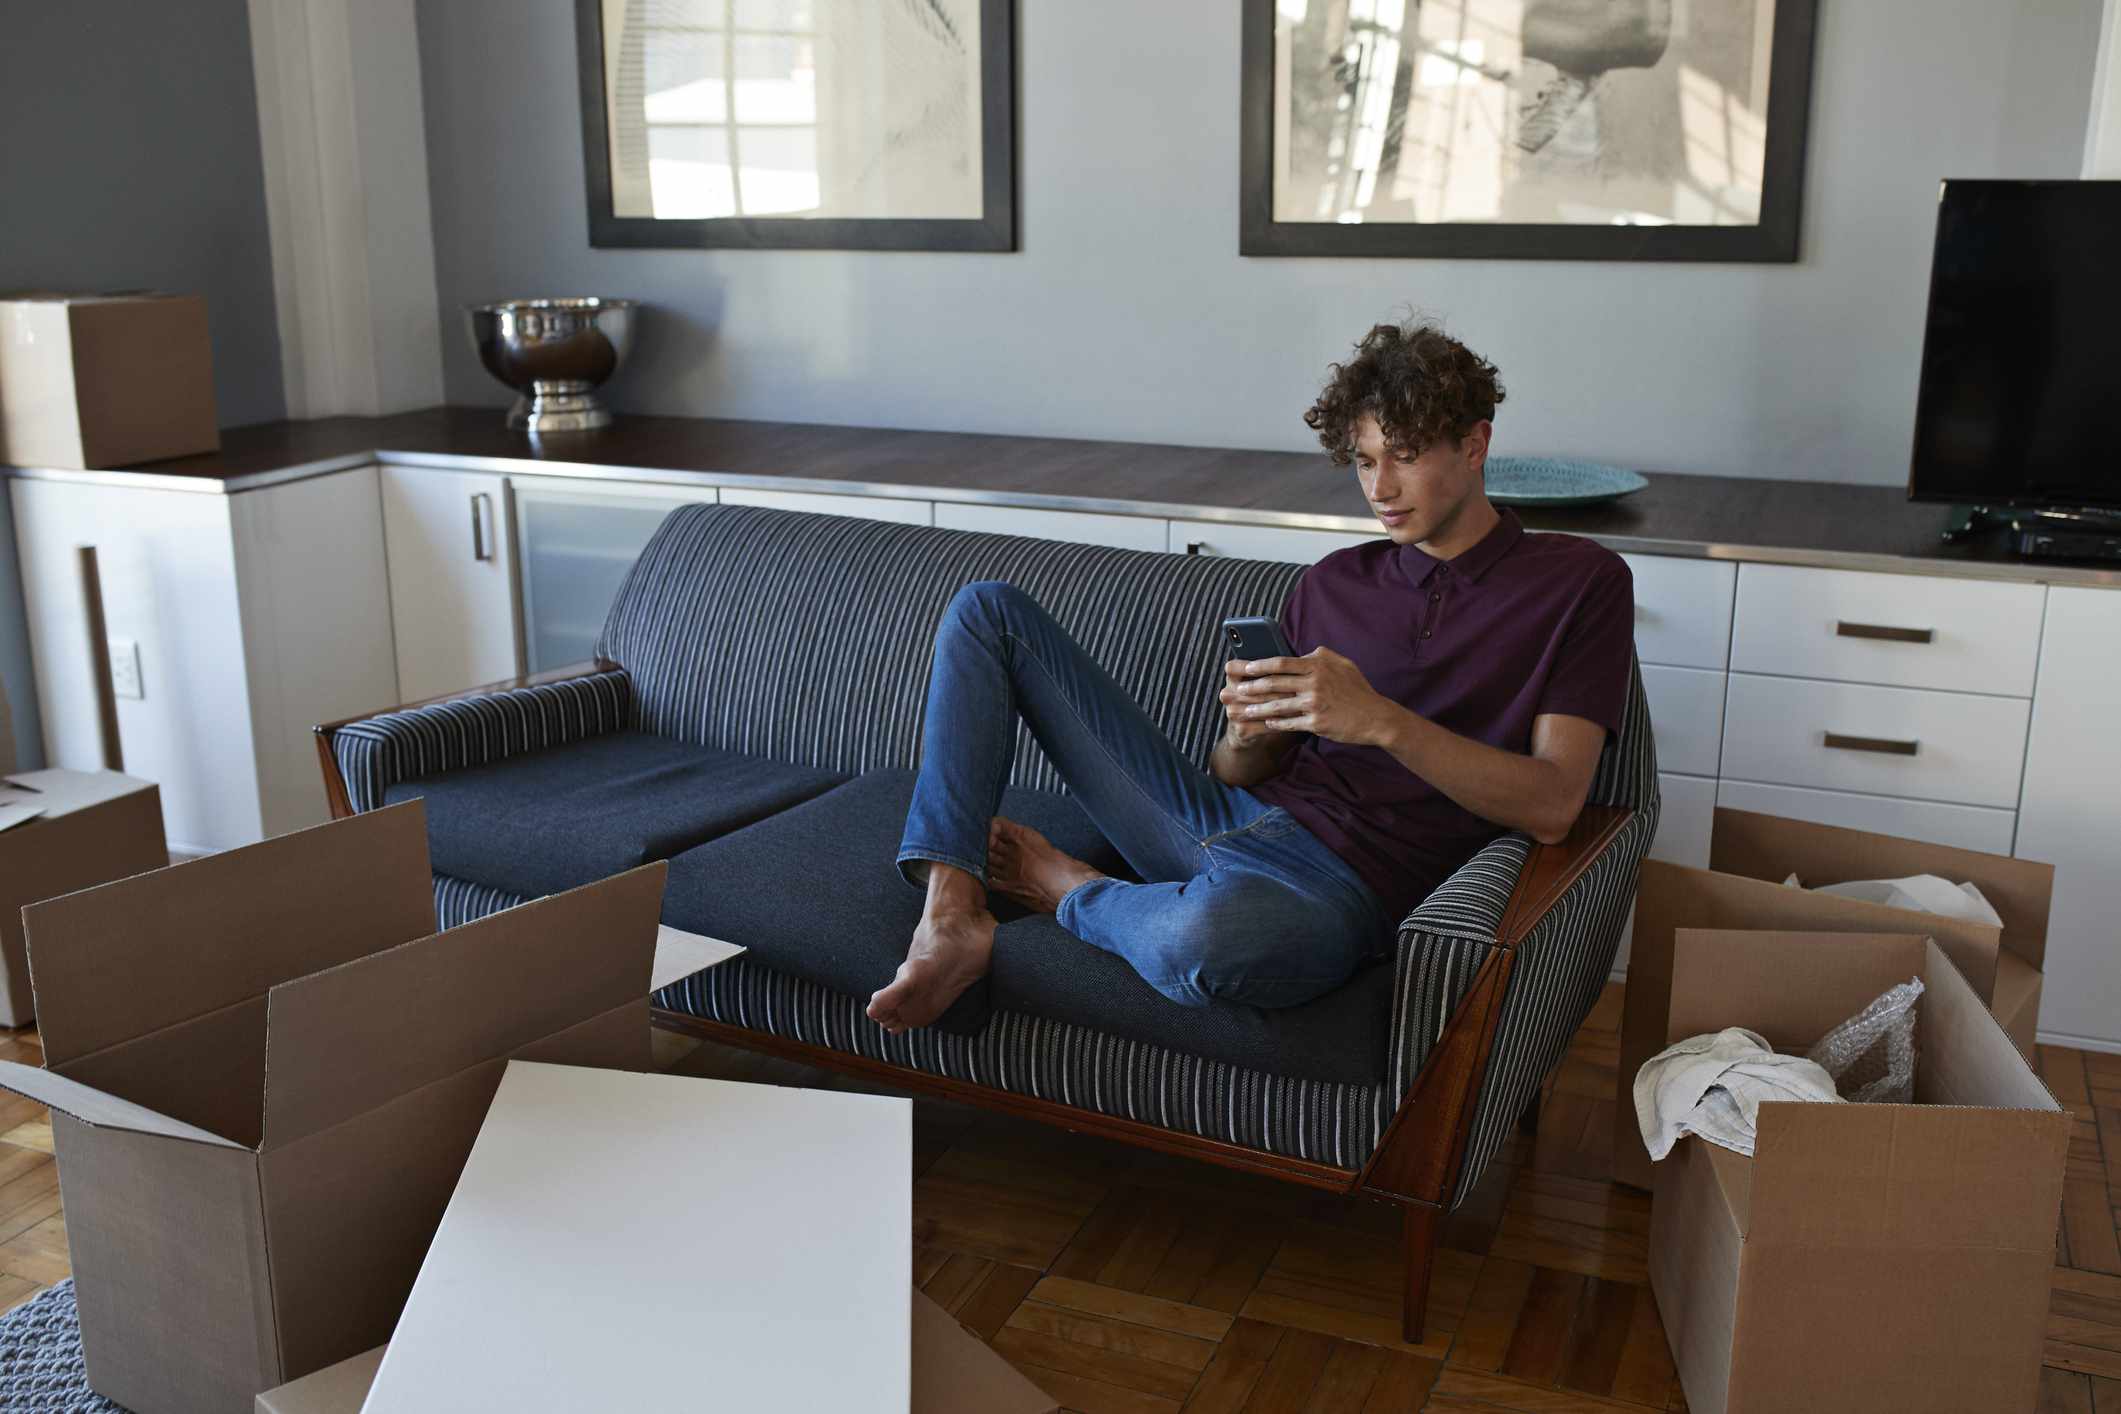 A renter sits on a couch texting, surrounded by open cardboard boxes in his new apartment